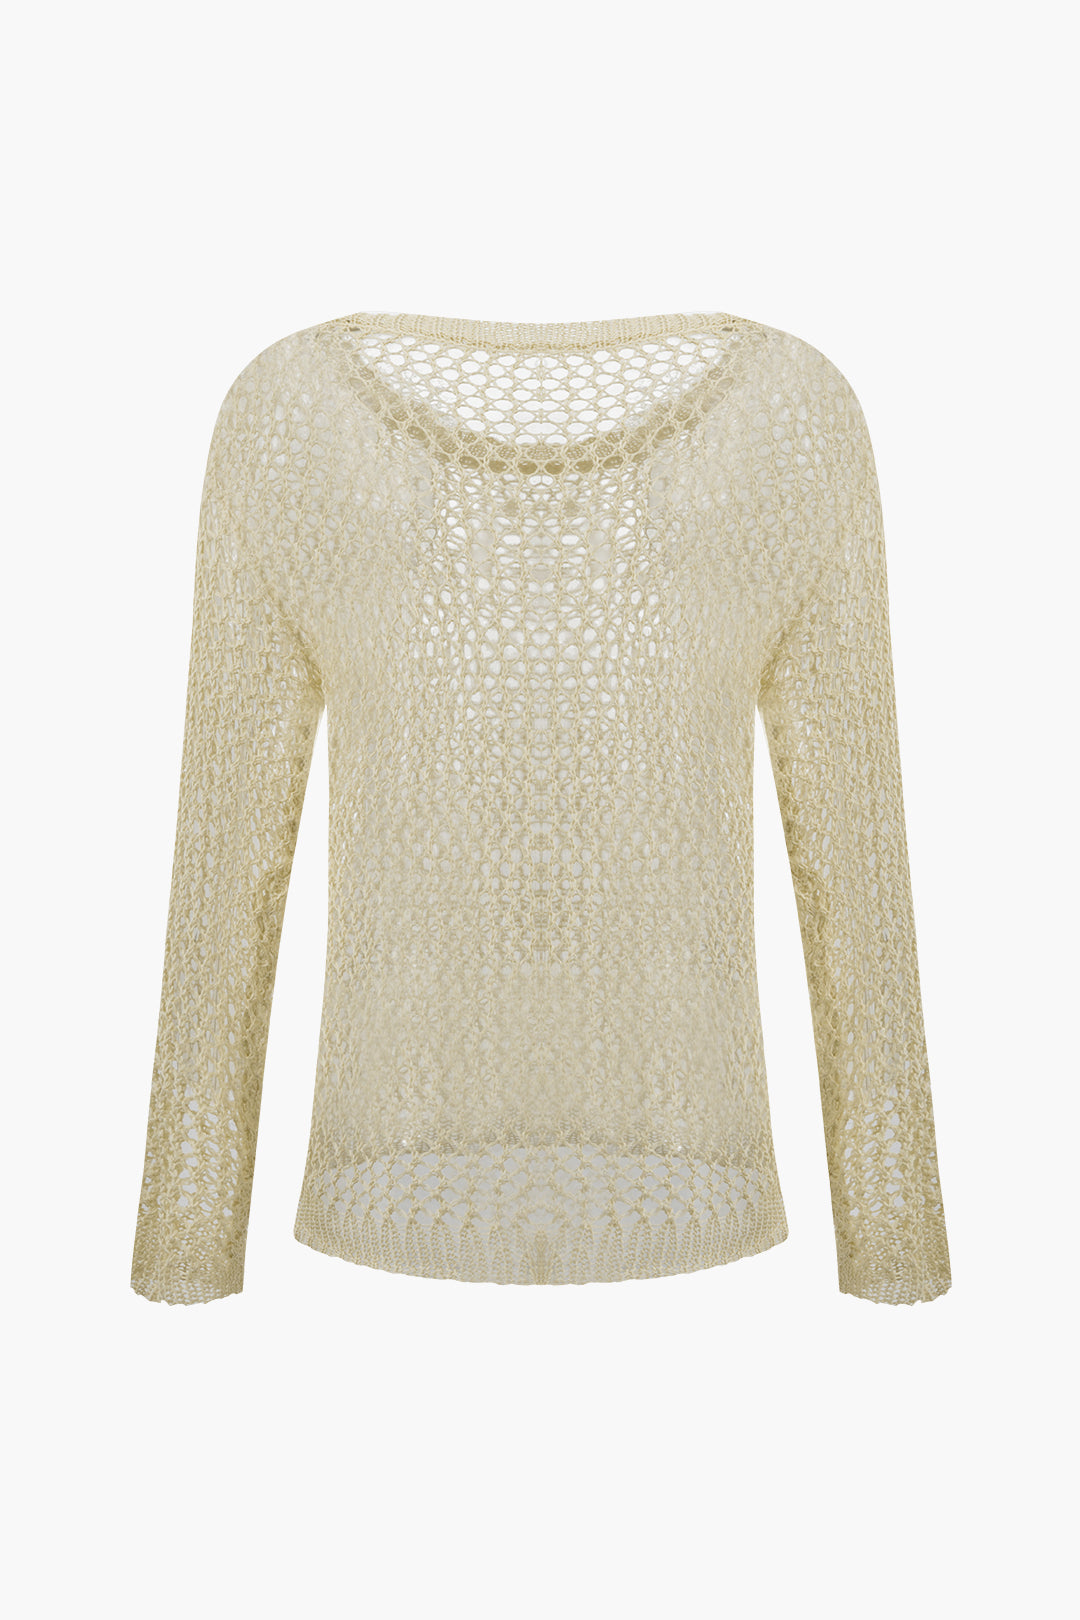 Crew Neck Crochet Knit Cover-Up Top